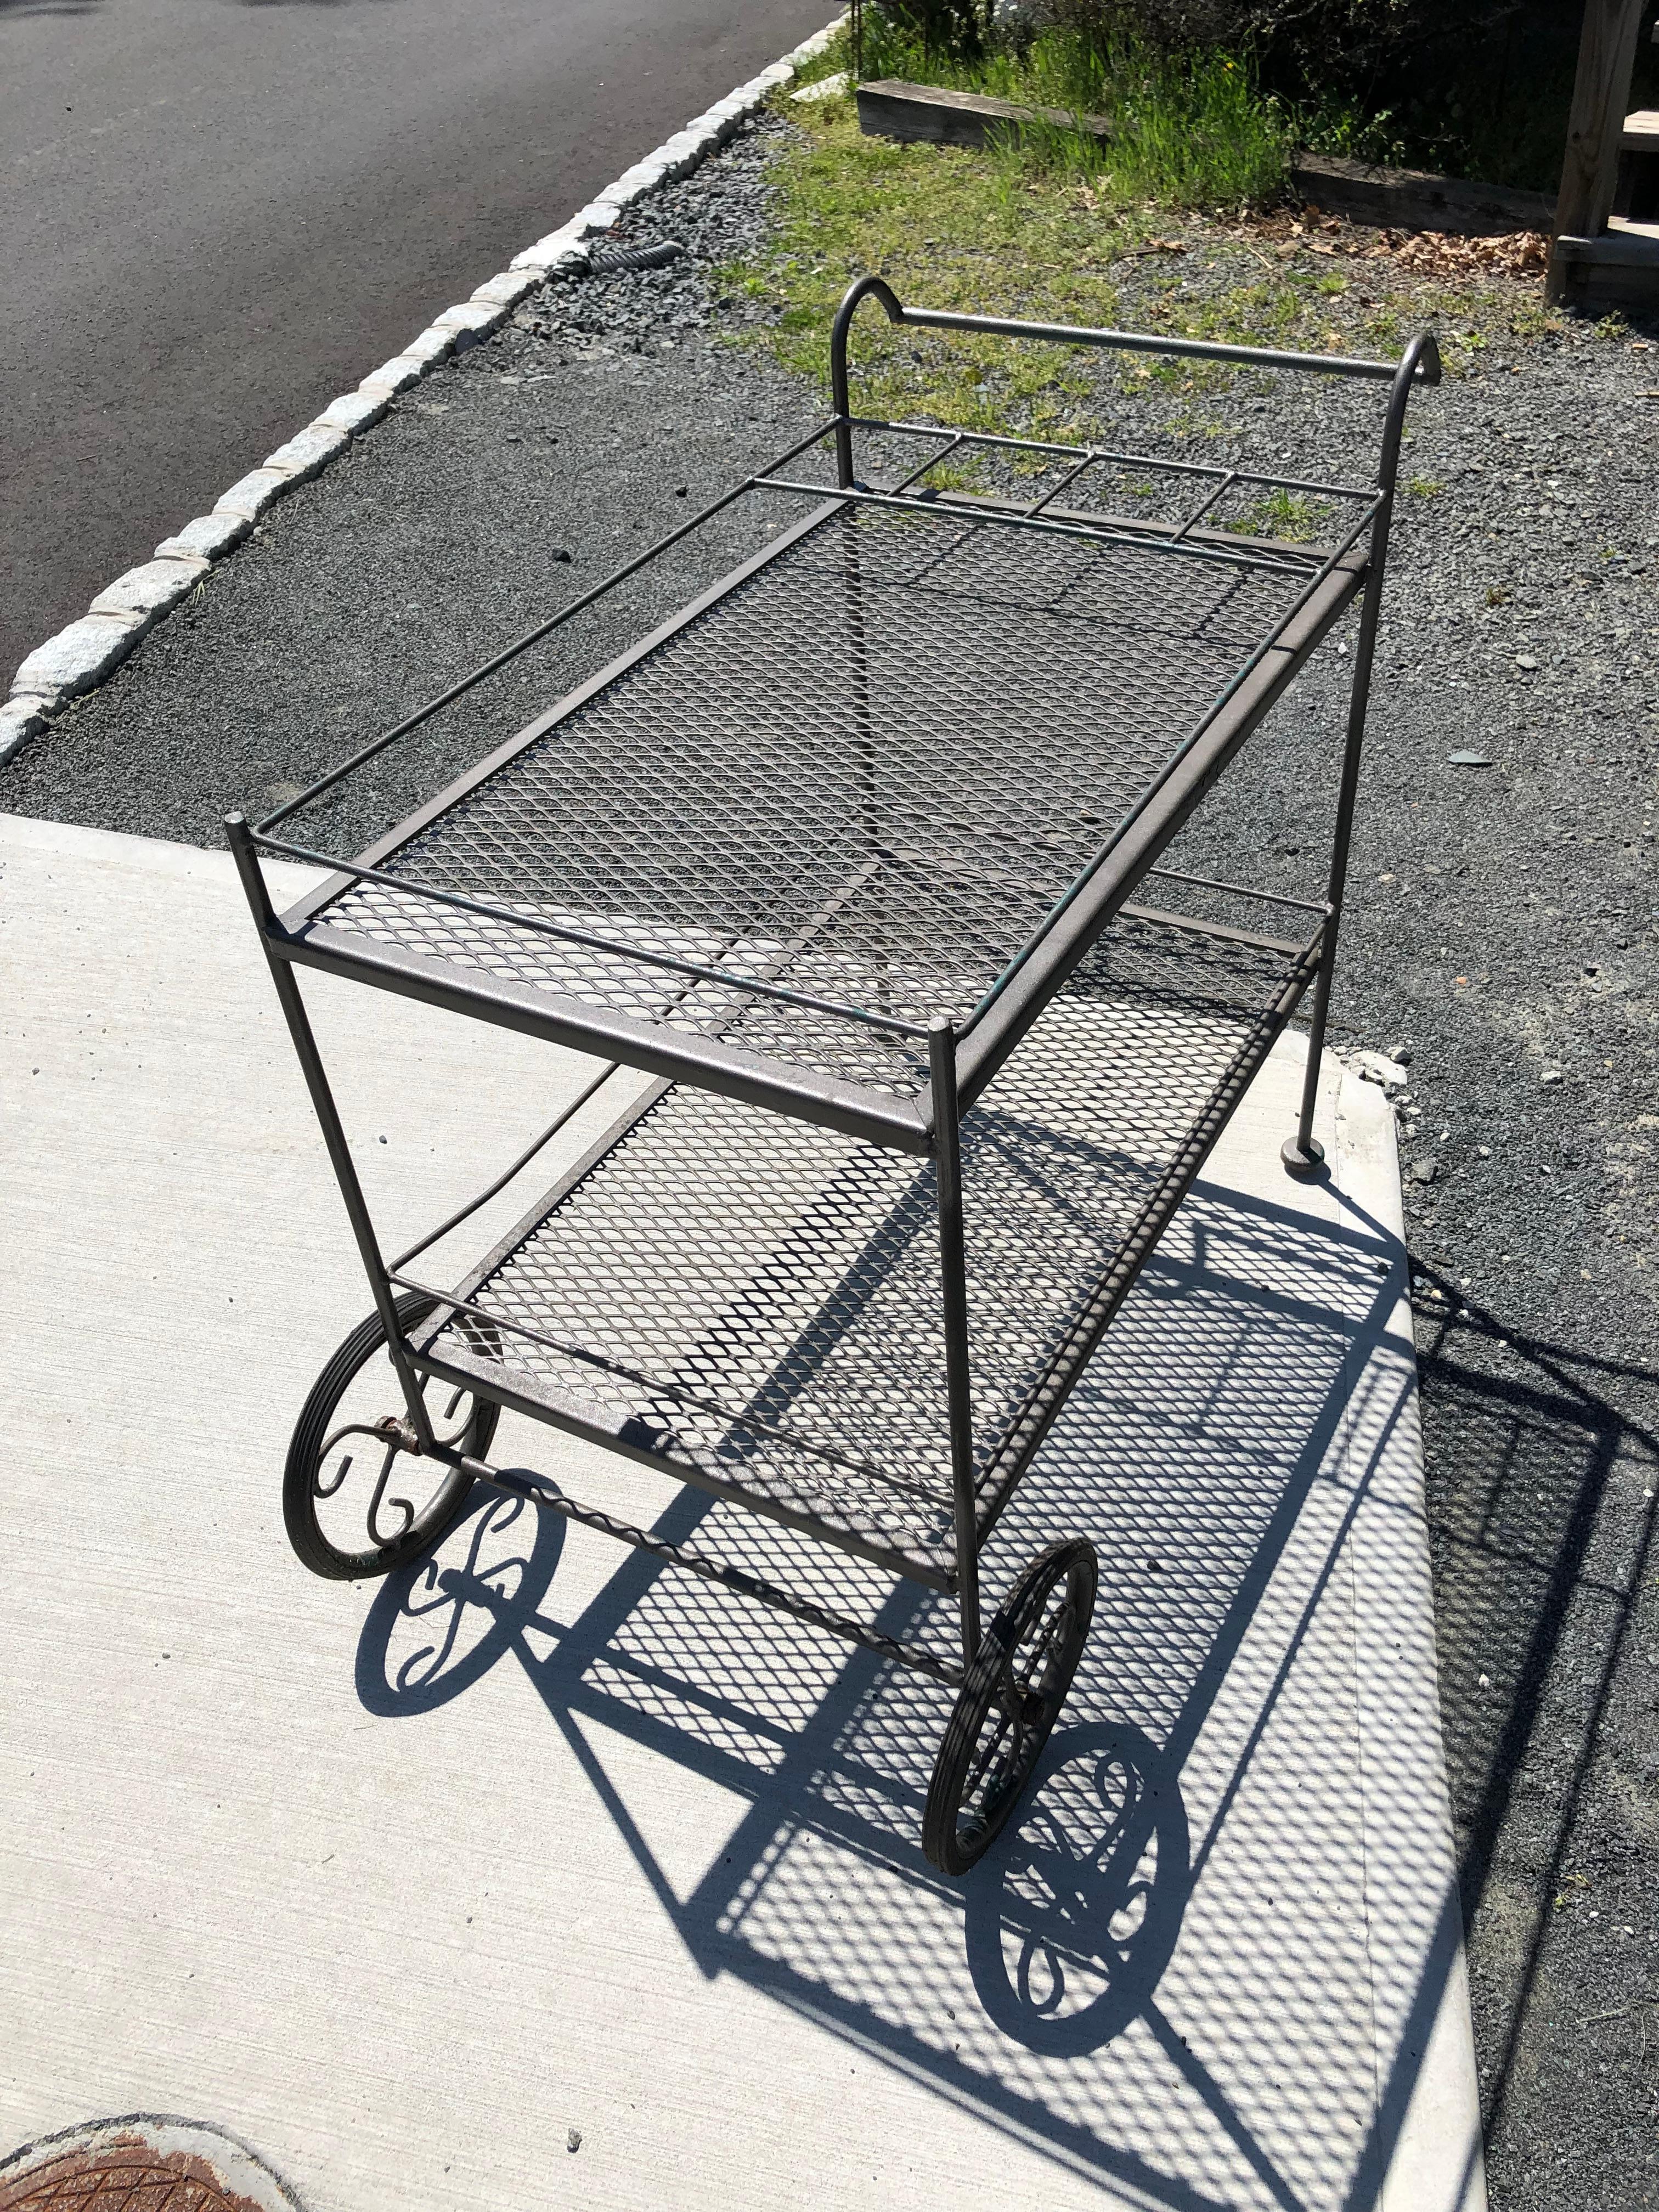 Classic vintage Woodard outdoor iron bar cart painted a gun metal color with some visible green undercoat. The cart has rubber tires, two tiers, and galleries around each surface. The top tier has space for bottles.
30.5 h to handle
27 h to